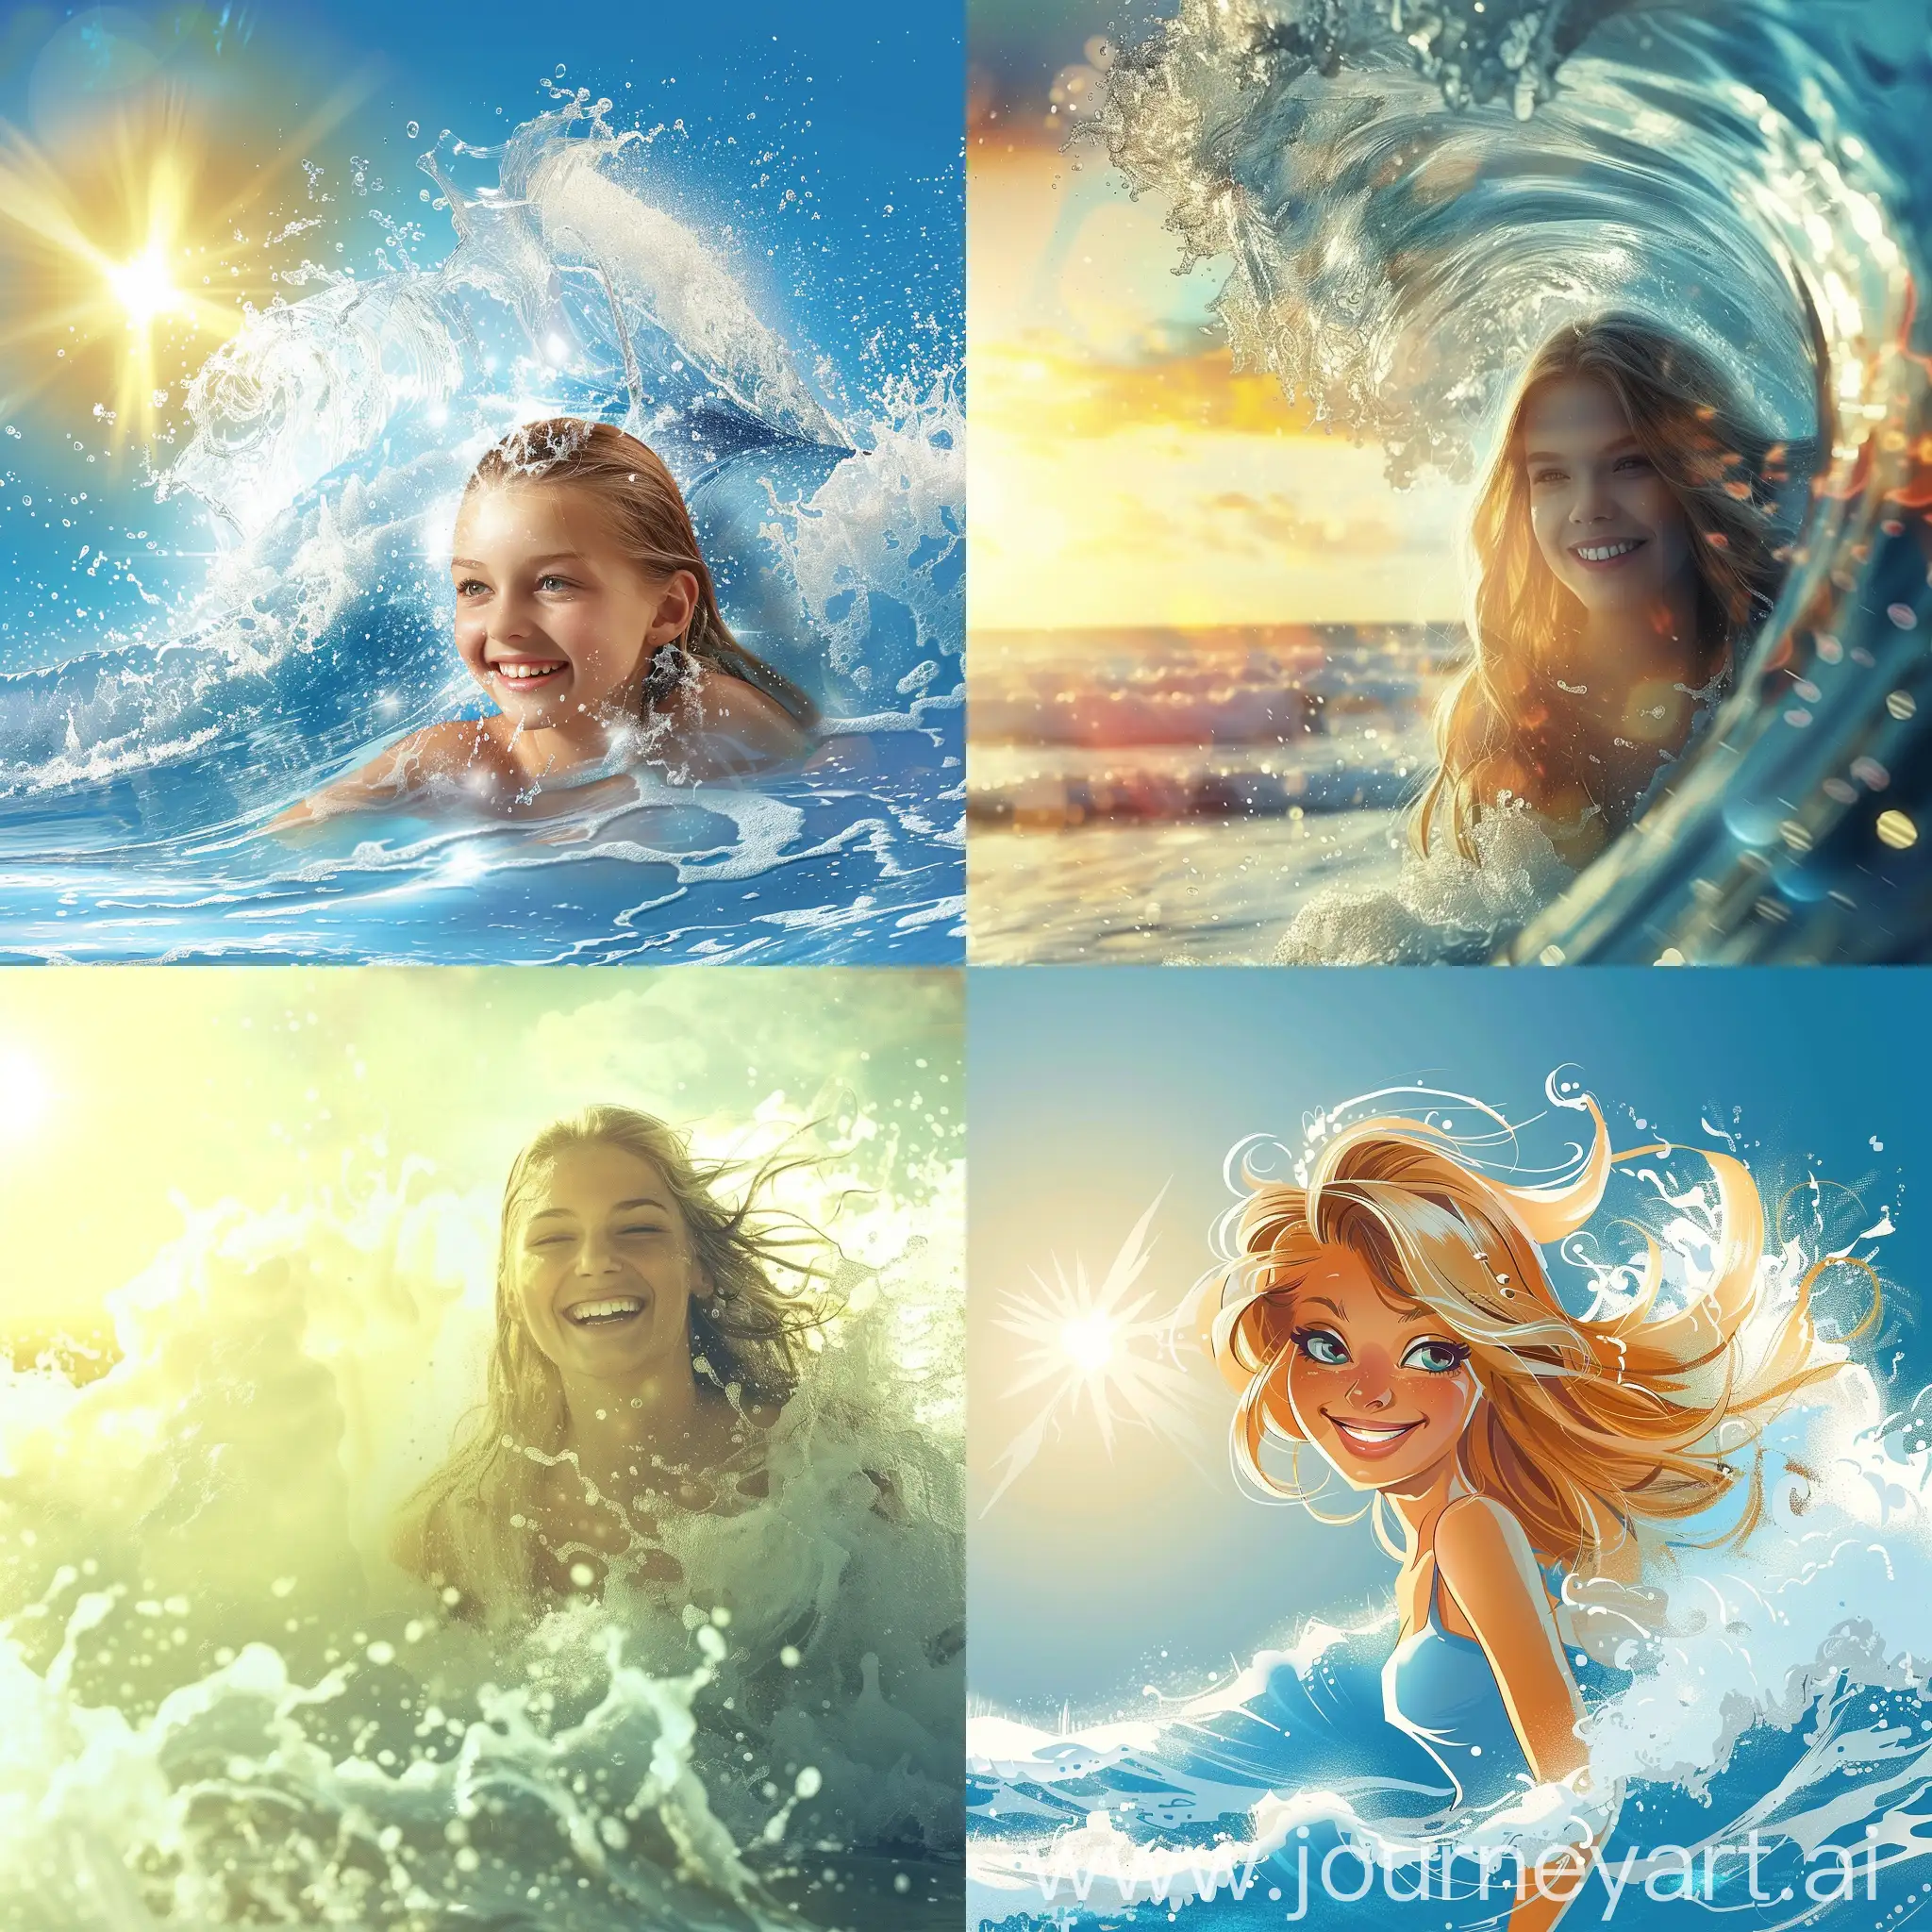 Graceful-Seaside-Moment-Radiant-Blonde-Emerges-from-Ocean-Wave